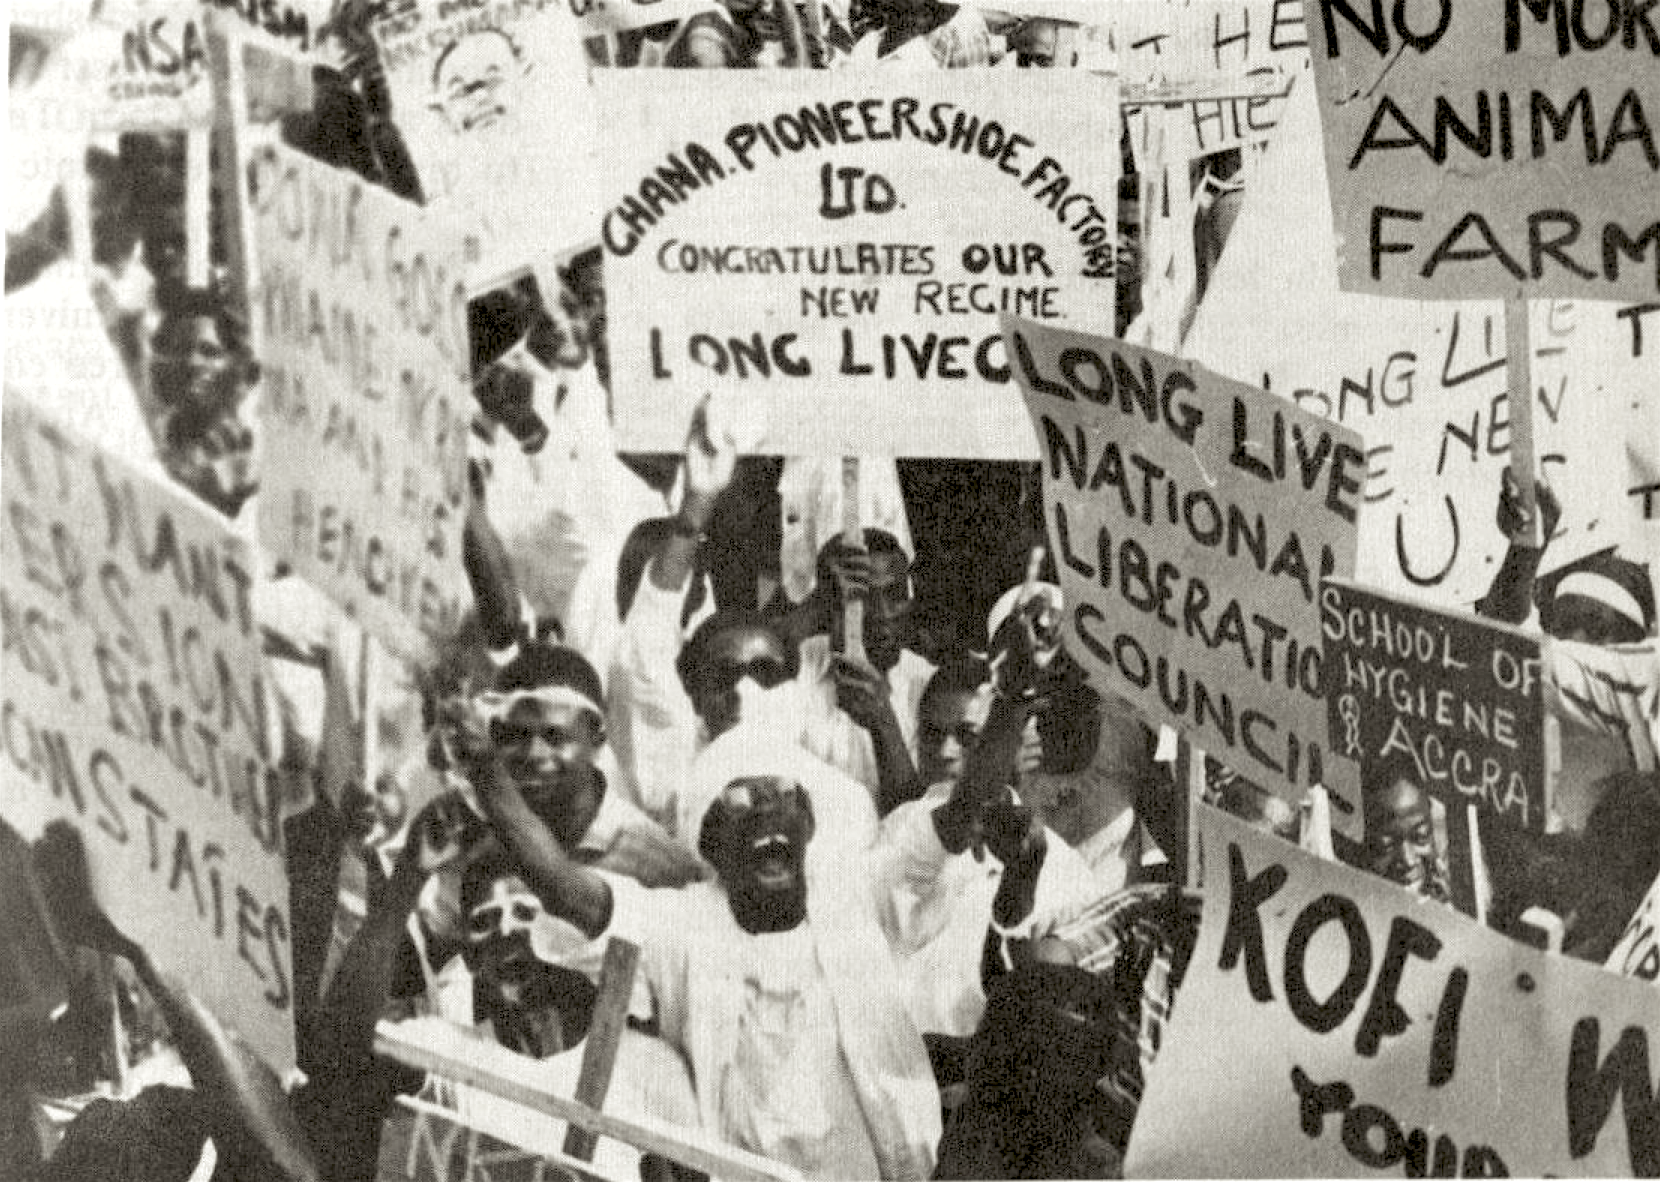 Accra. Ghanaians demonstrating support for the National Liberation Council, led by General Ankrah, after the overthrow of Nkrumah. February 24, 1966. (Photo courtesy of Ghana Information Services)